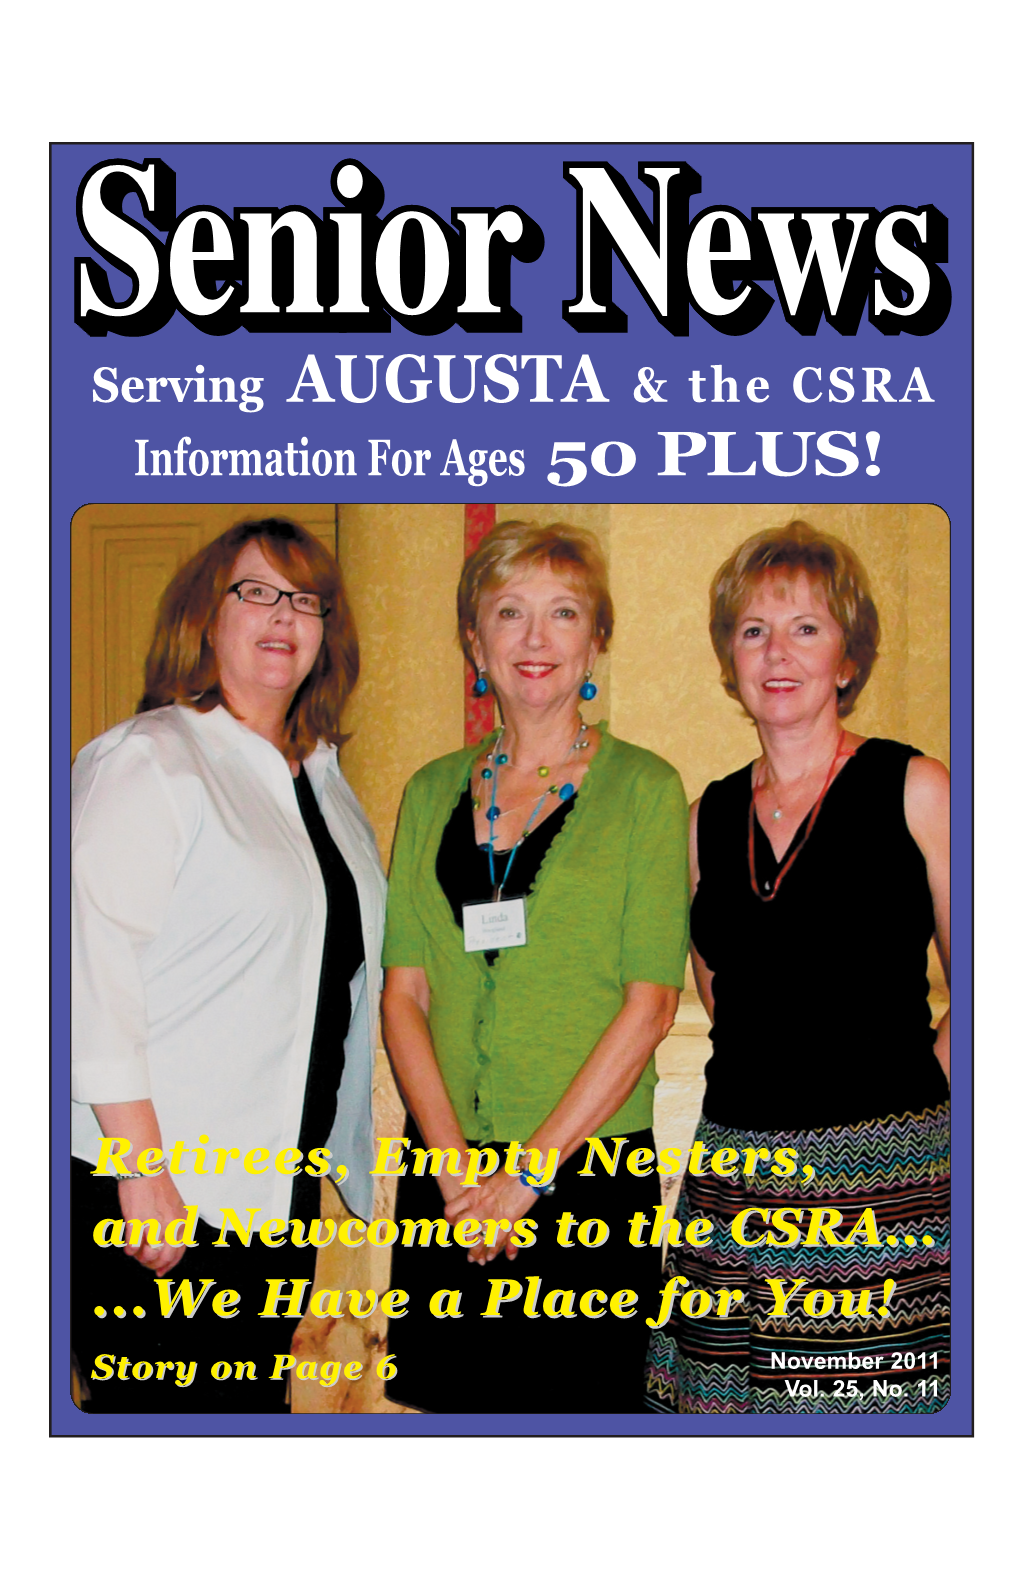 Retirees, Empty Nesters, and Newcomers to the CSRA...We Have a Place for You!